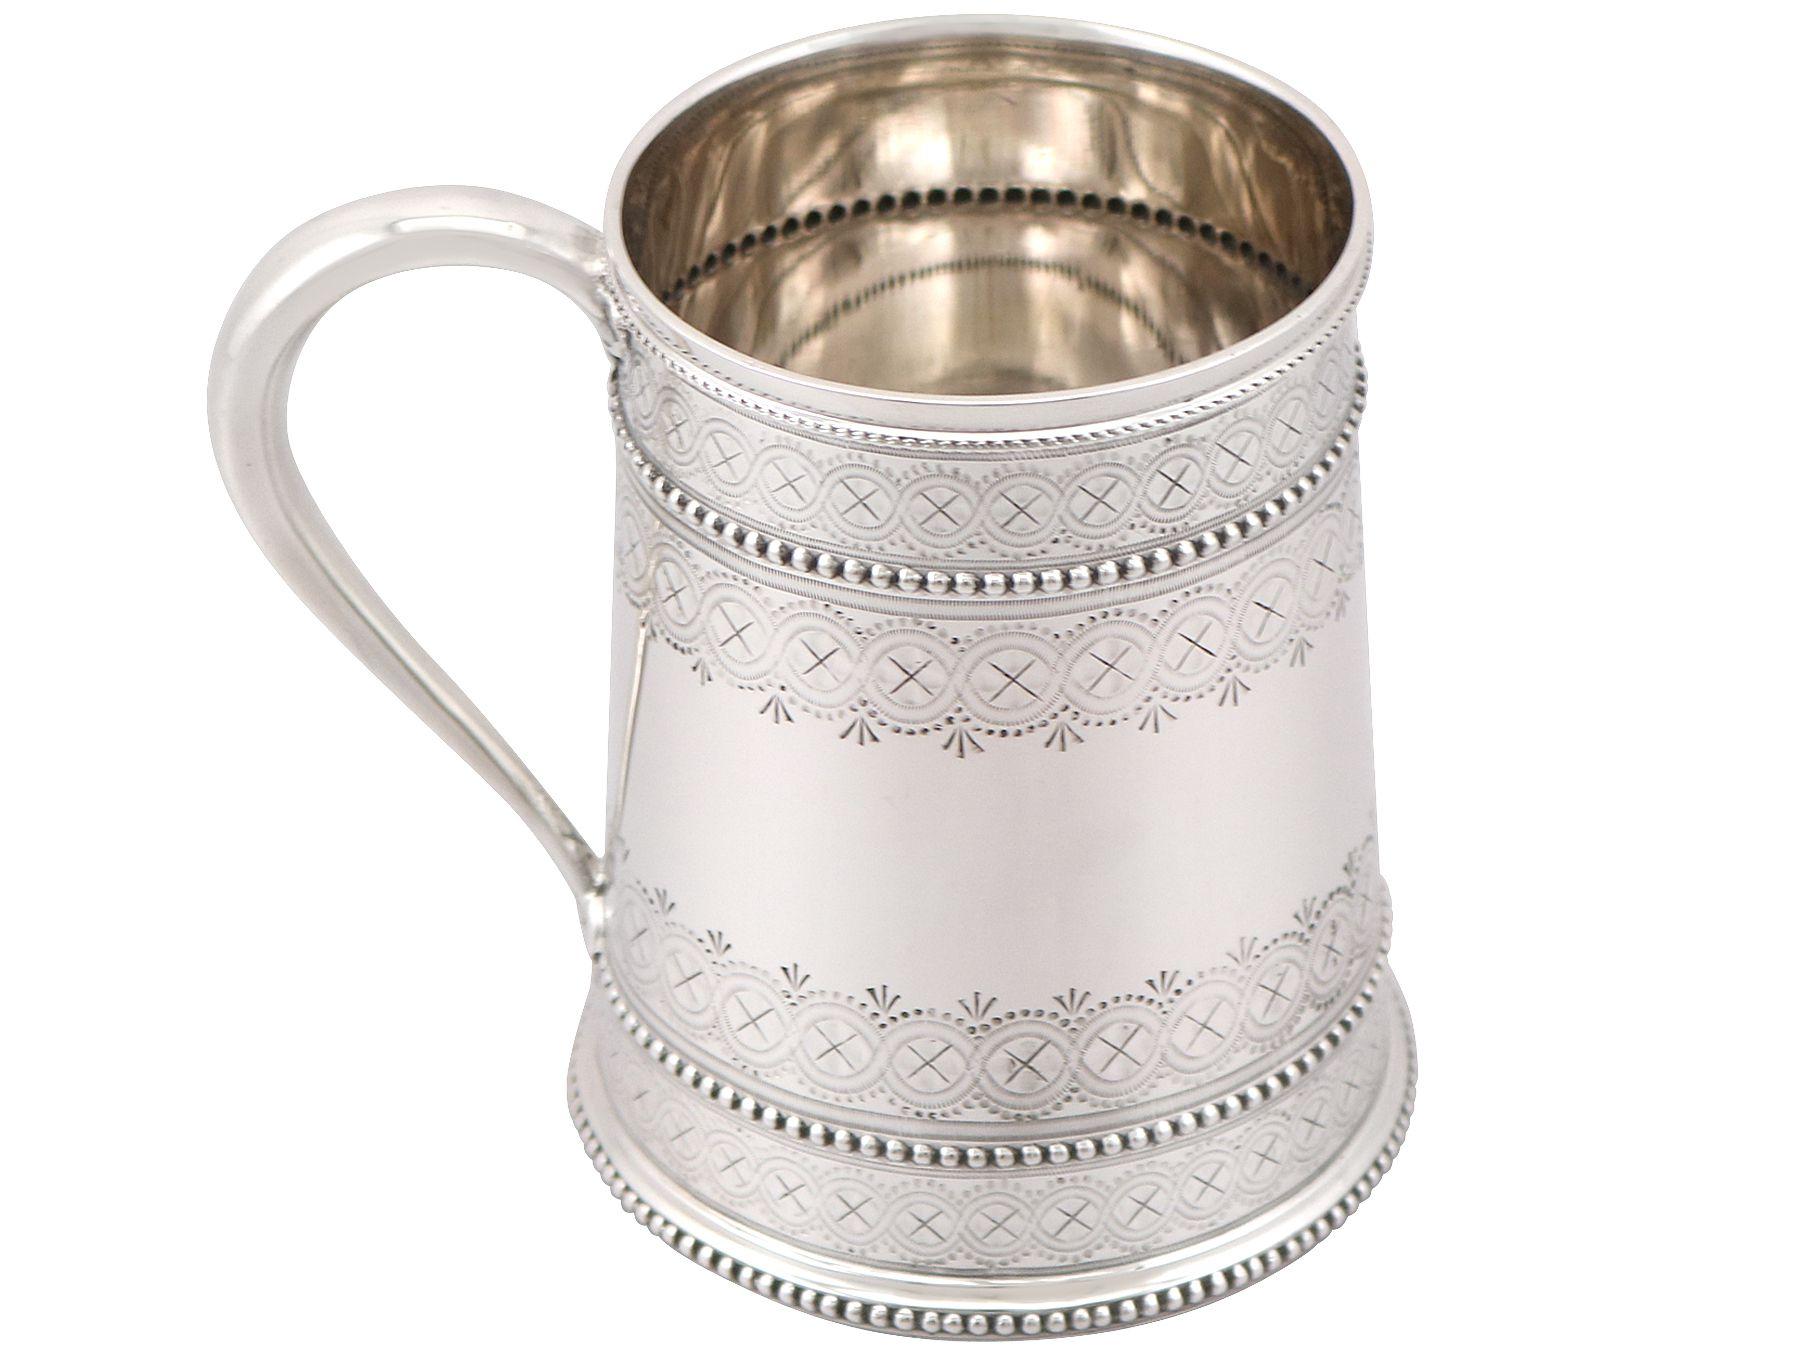 An exceptional, fine and impressive antique Victorian English sterling silver christening mug; an addition to our silver christening collection.

This exceptional antique Victorian sterling silver christening mug has a tapering cylindrical